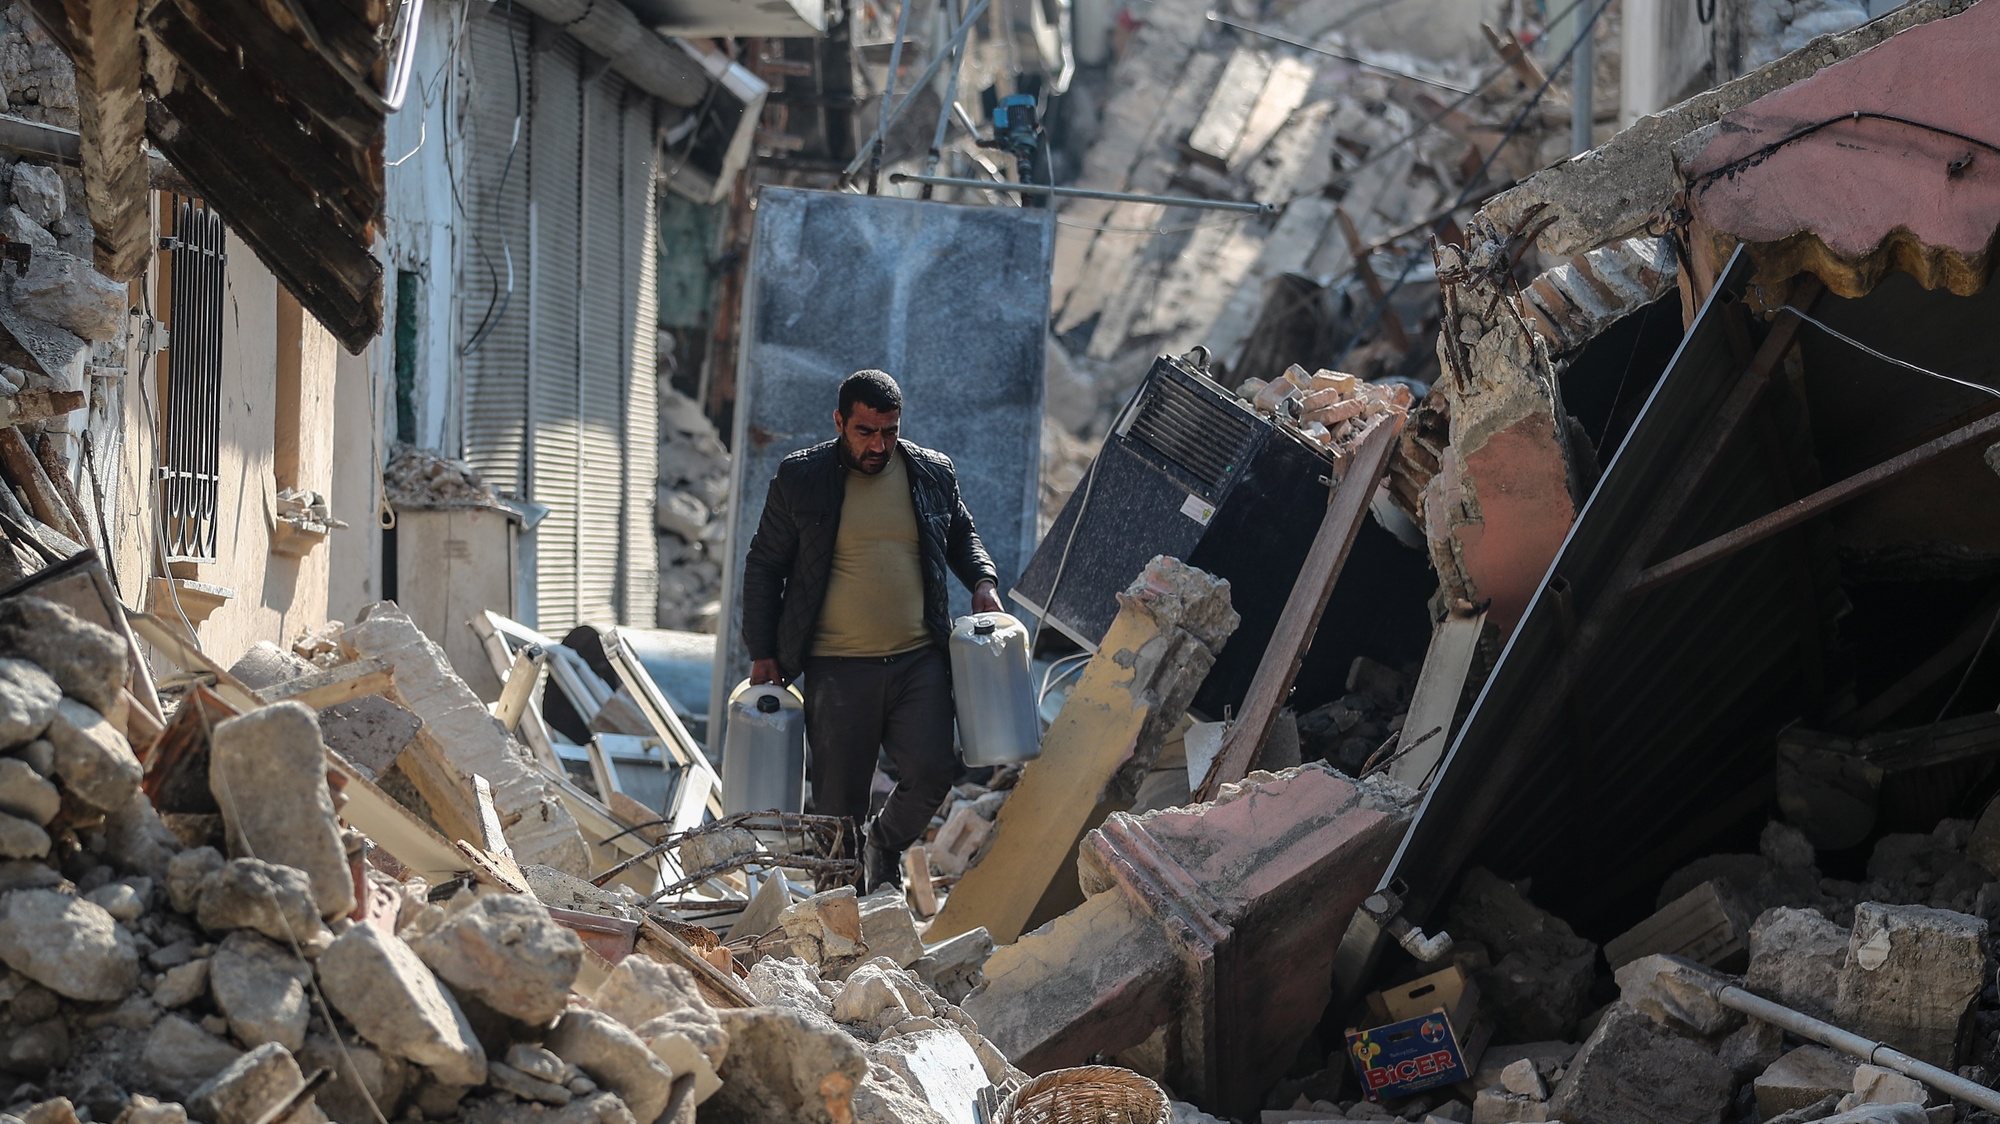 epaselect epa10485019 A man walks among the rubble of collapsed buildings in the aftermath of powerful earthquakes in Hatay, Turkey, 23 February 2023. More than 46,000 people died and thousands more were injured after major earthquakes struck southern Turkey and northern Syria on 06 February and again on 20 February.  EPA/ERDEM SAHIN